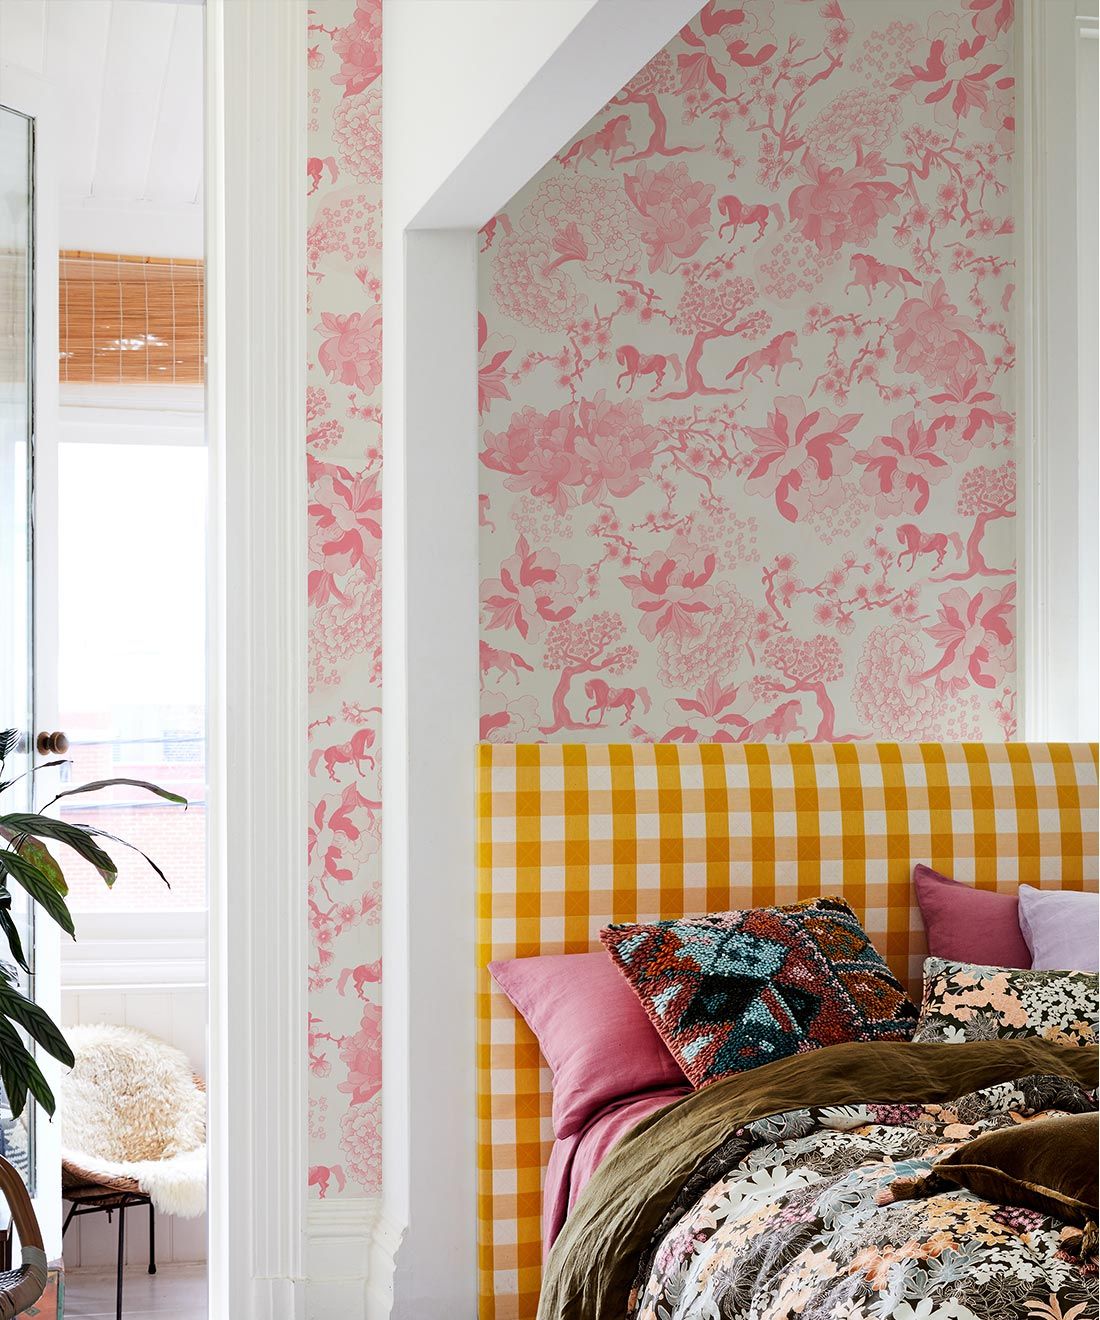 Gallop Wallpaper • Horse Wallpaper • Fleur • Insitu with bed and plaid headboard